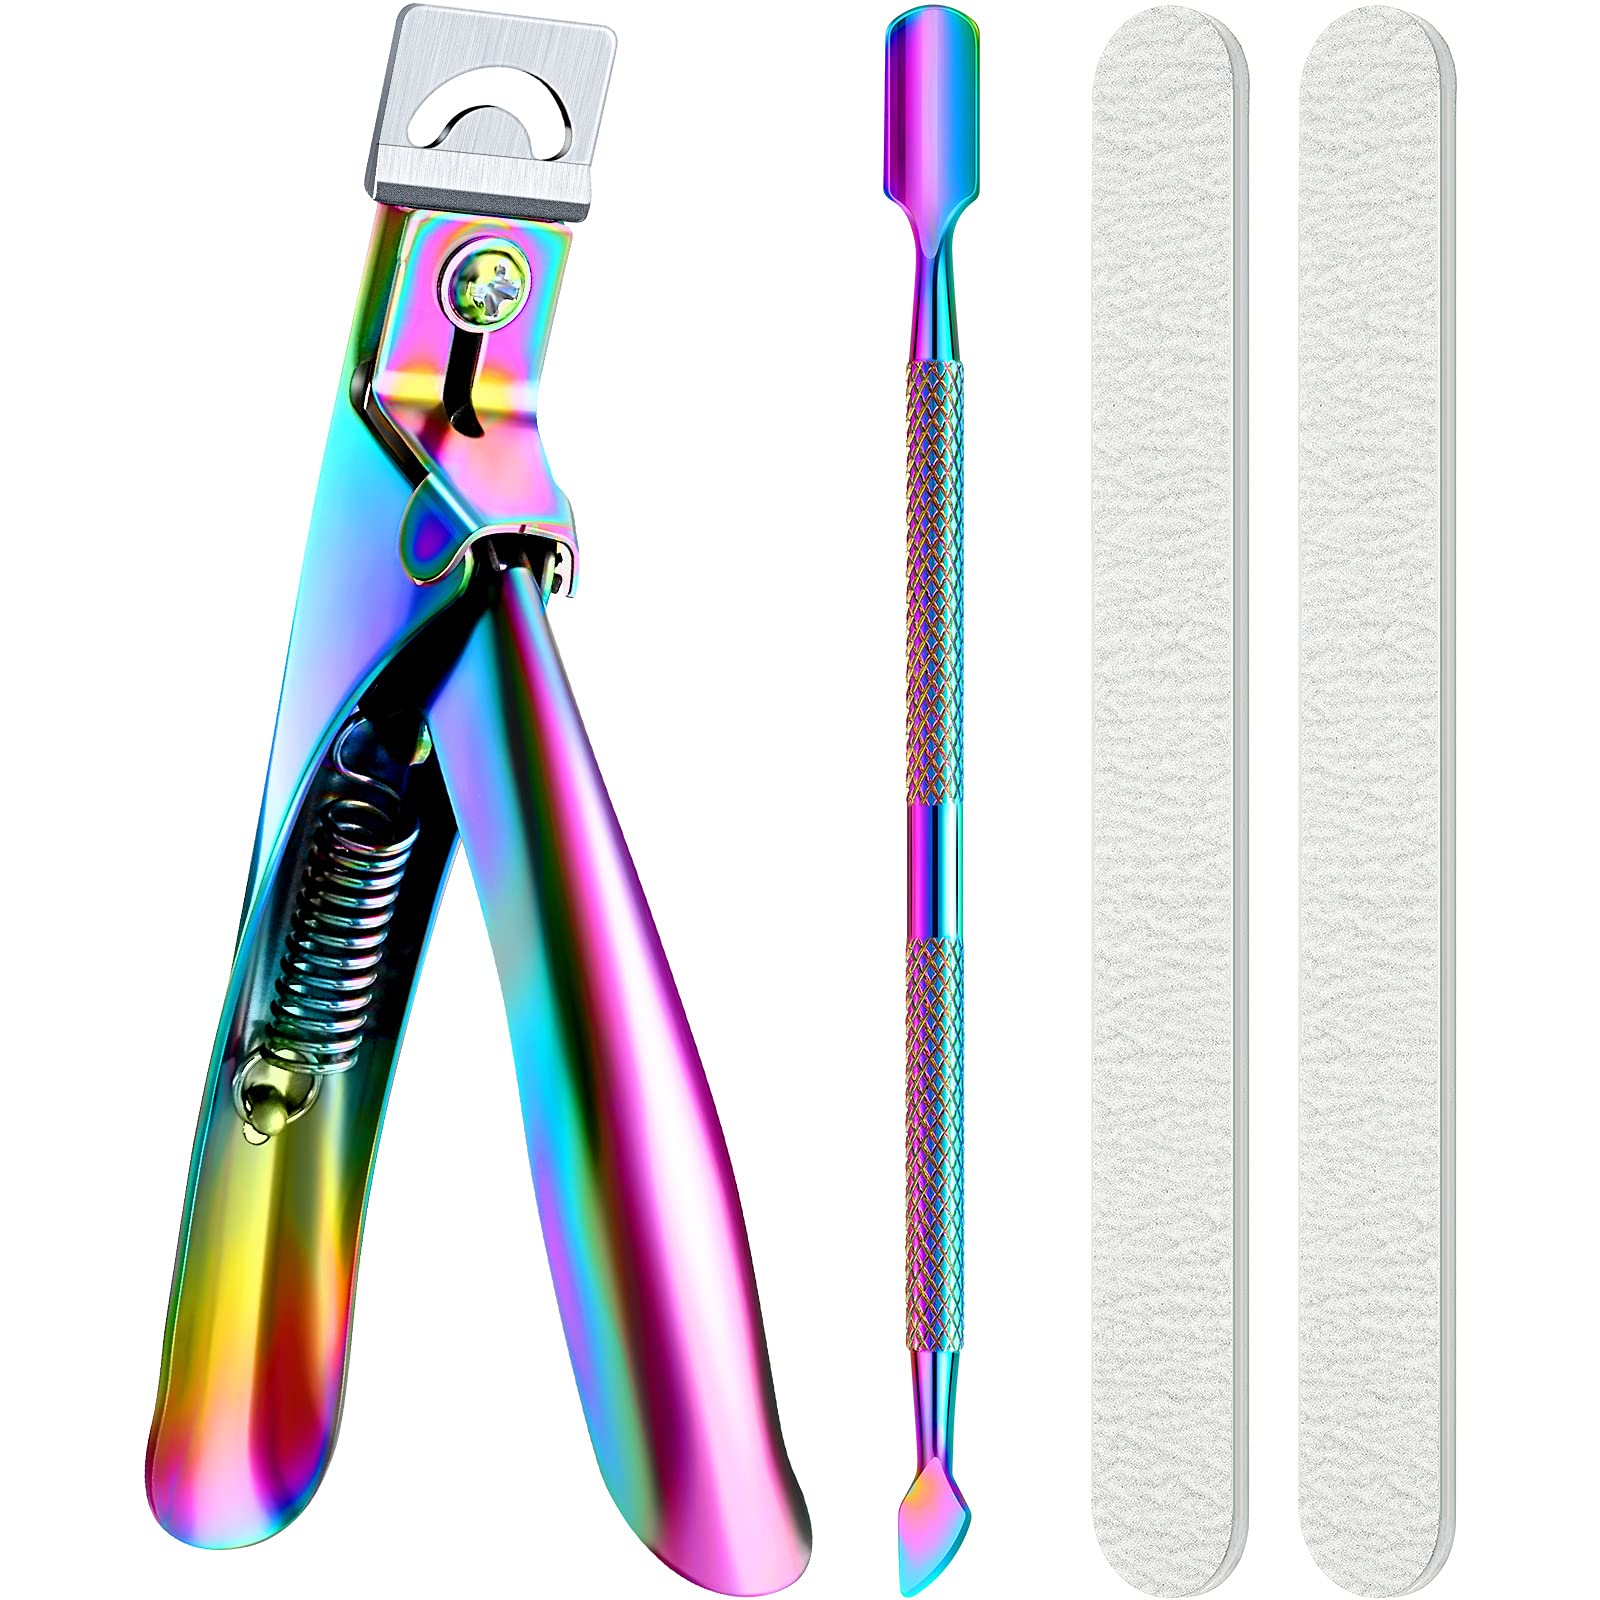 Stainless Steel Nail Clippers Cutter Trimmer Manicure Scissors